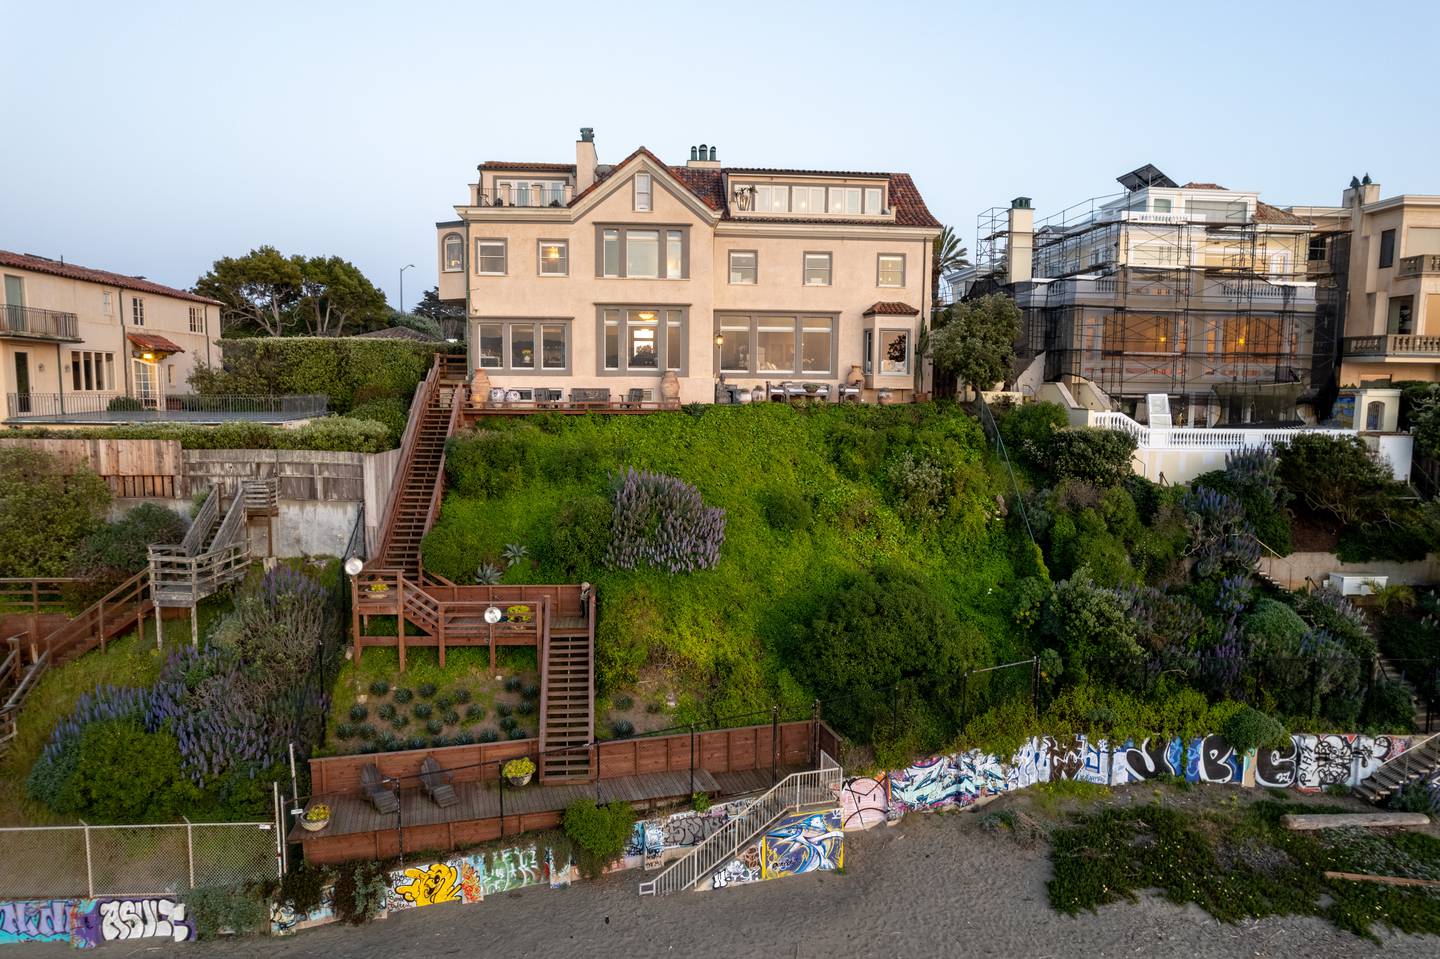 There is private access to Baker Beach, which forms part of the Presidio national park. Photos: TopTenRealEstateDeals.com